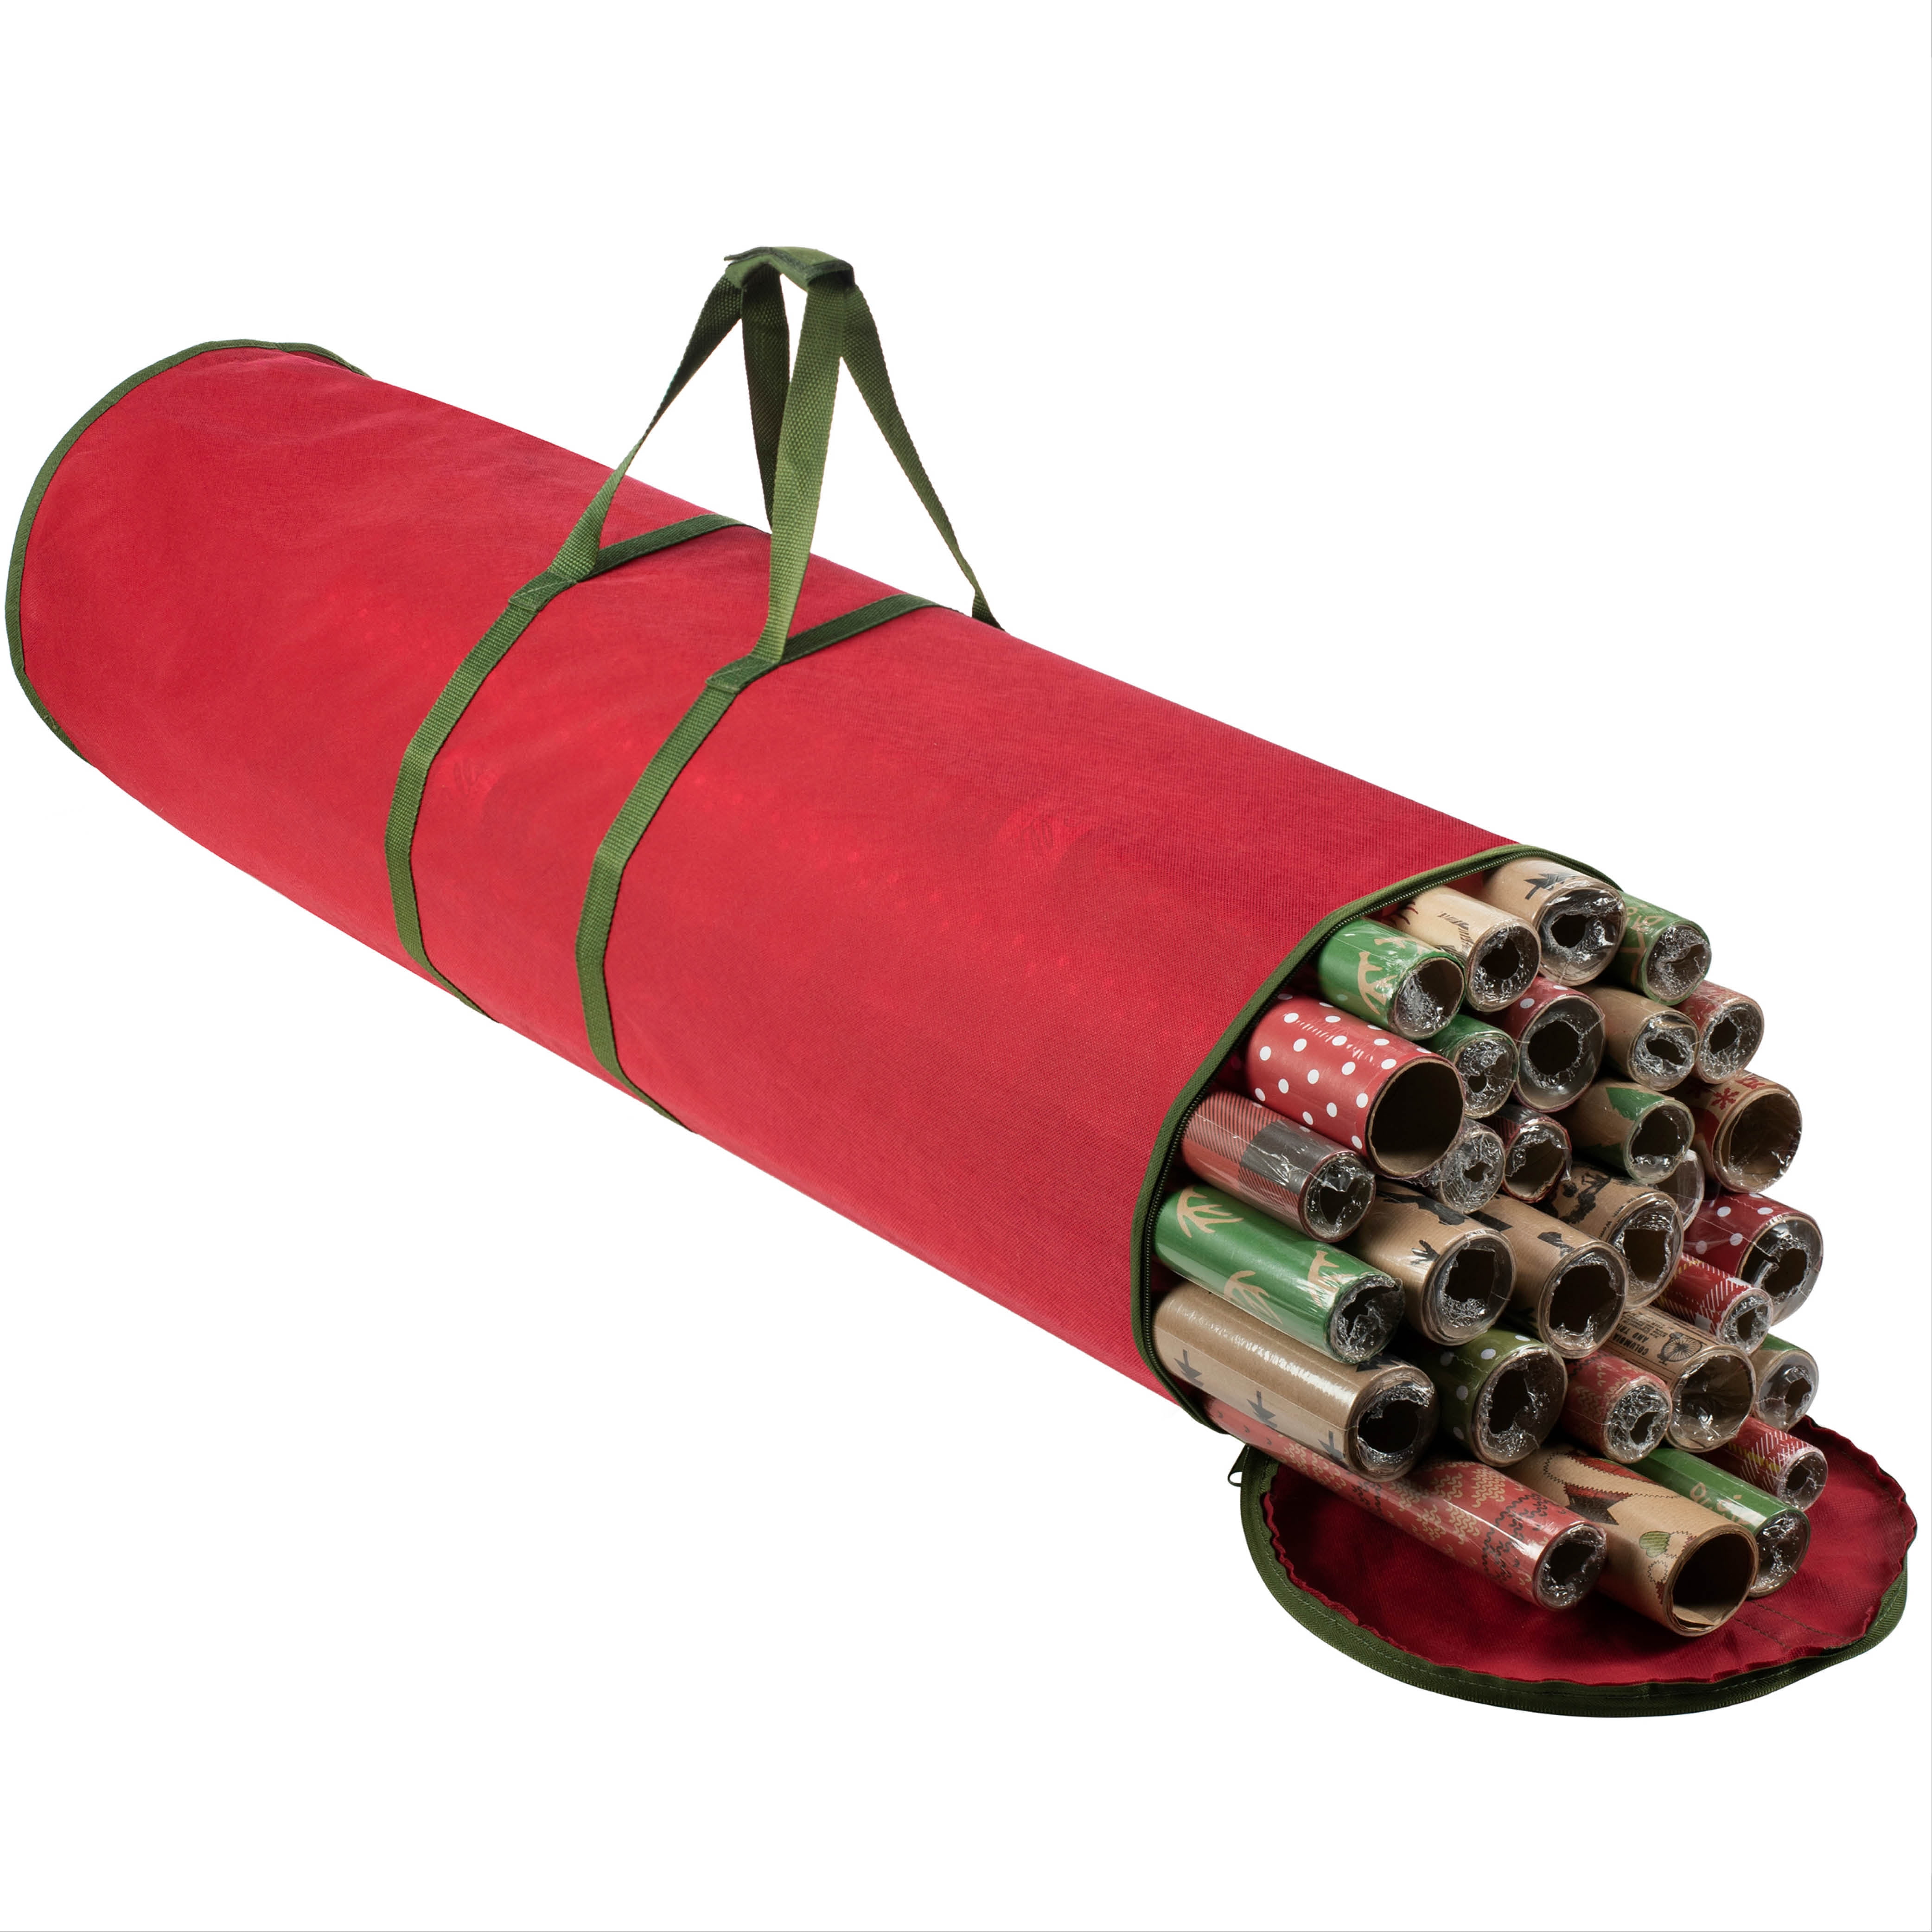 Hearth & Harbor Waterproof Christmas Wrapping Paper Storage Bag Fits 14-20 Rolls 40 Inches Long